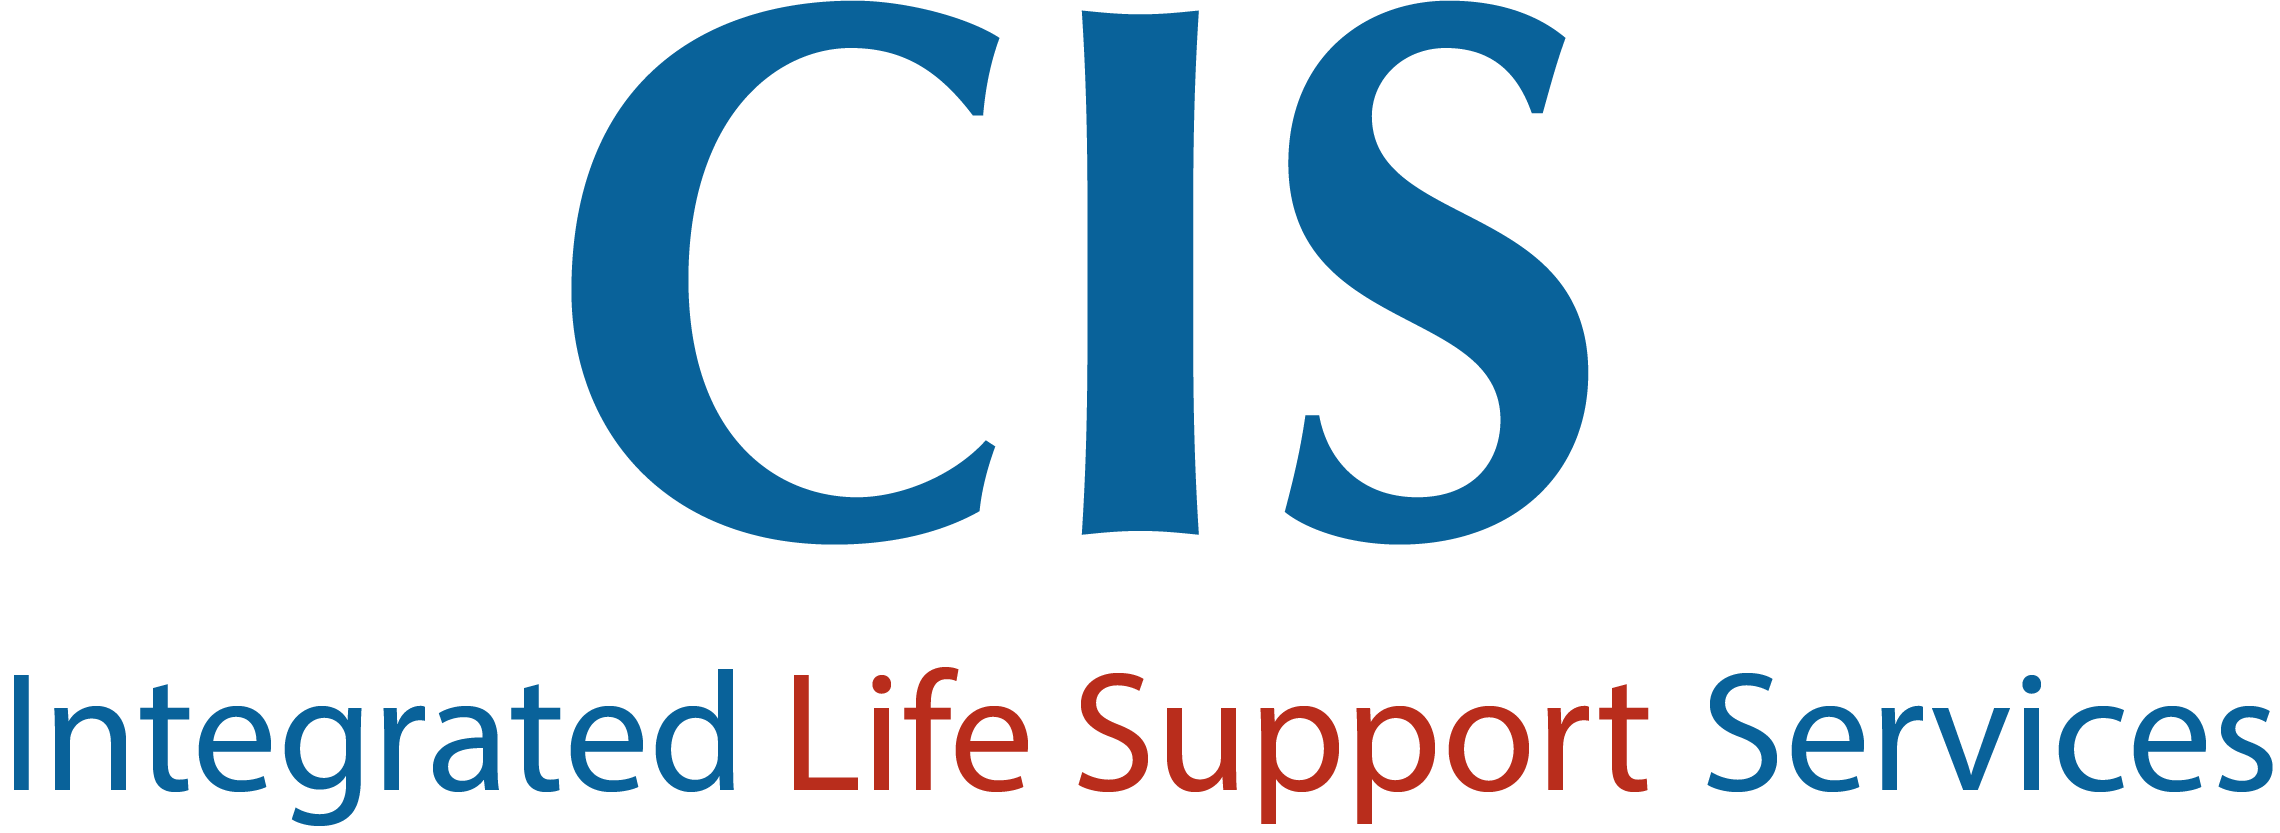 CIS Logo - CIS Groupe | Integrated Life Support Services